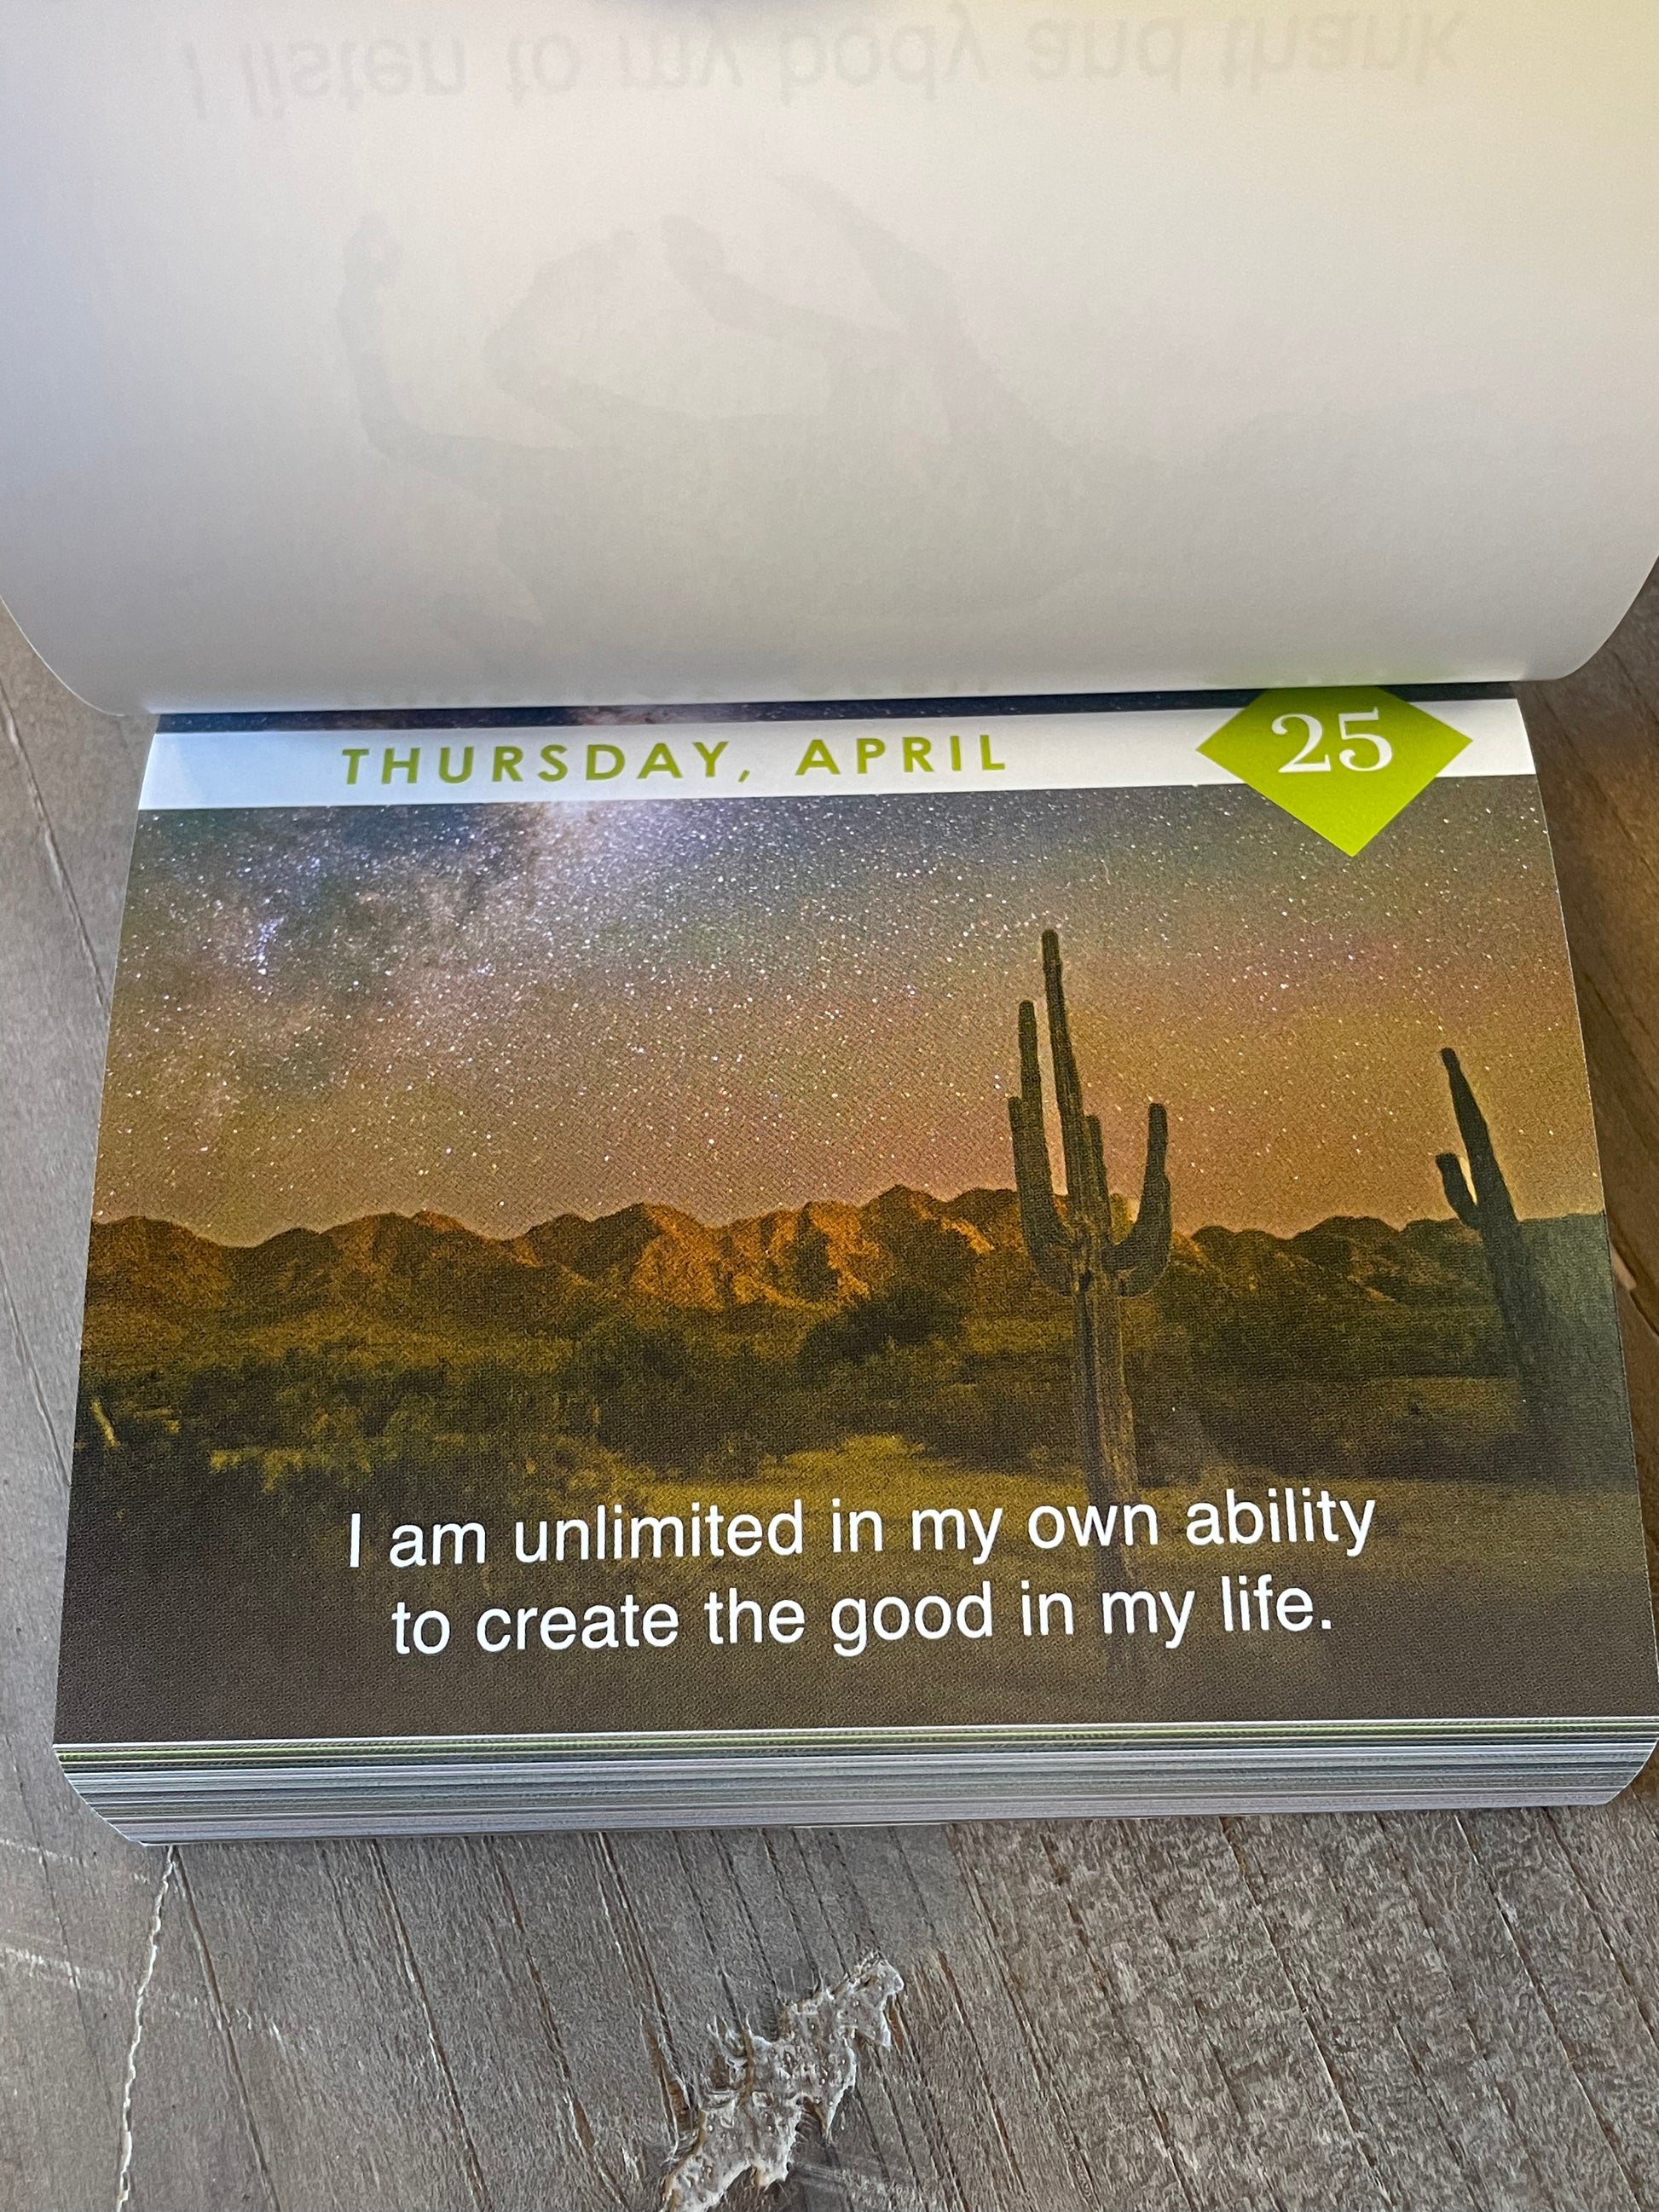 I Can Do It® 2024 Calendar by Louise Hay: 9781401971502